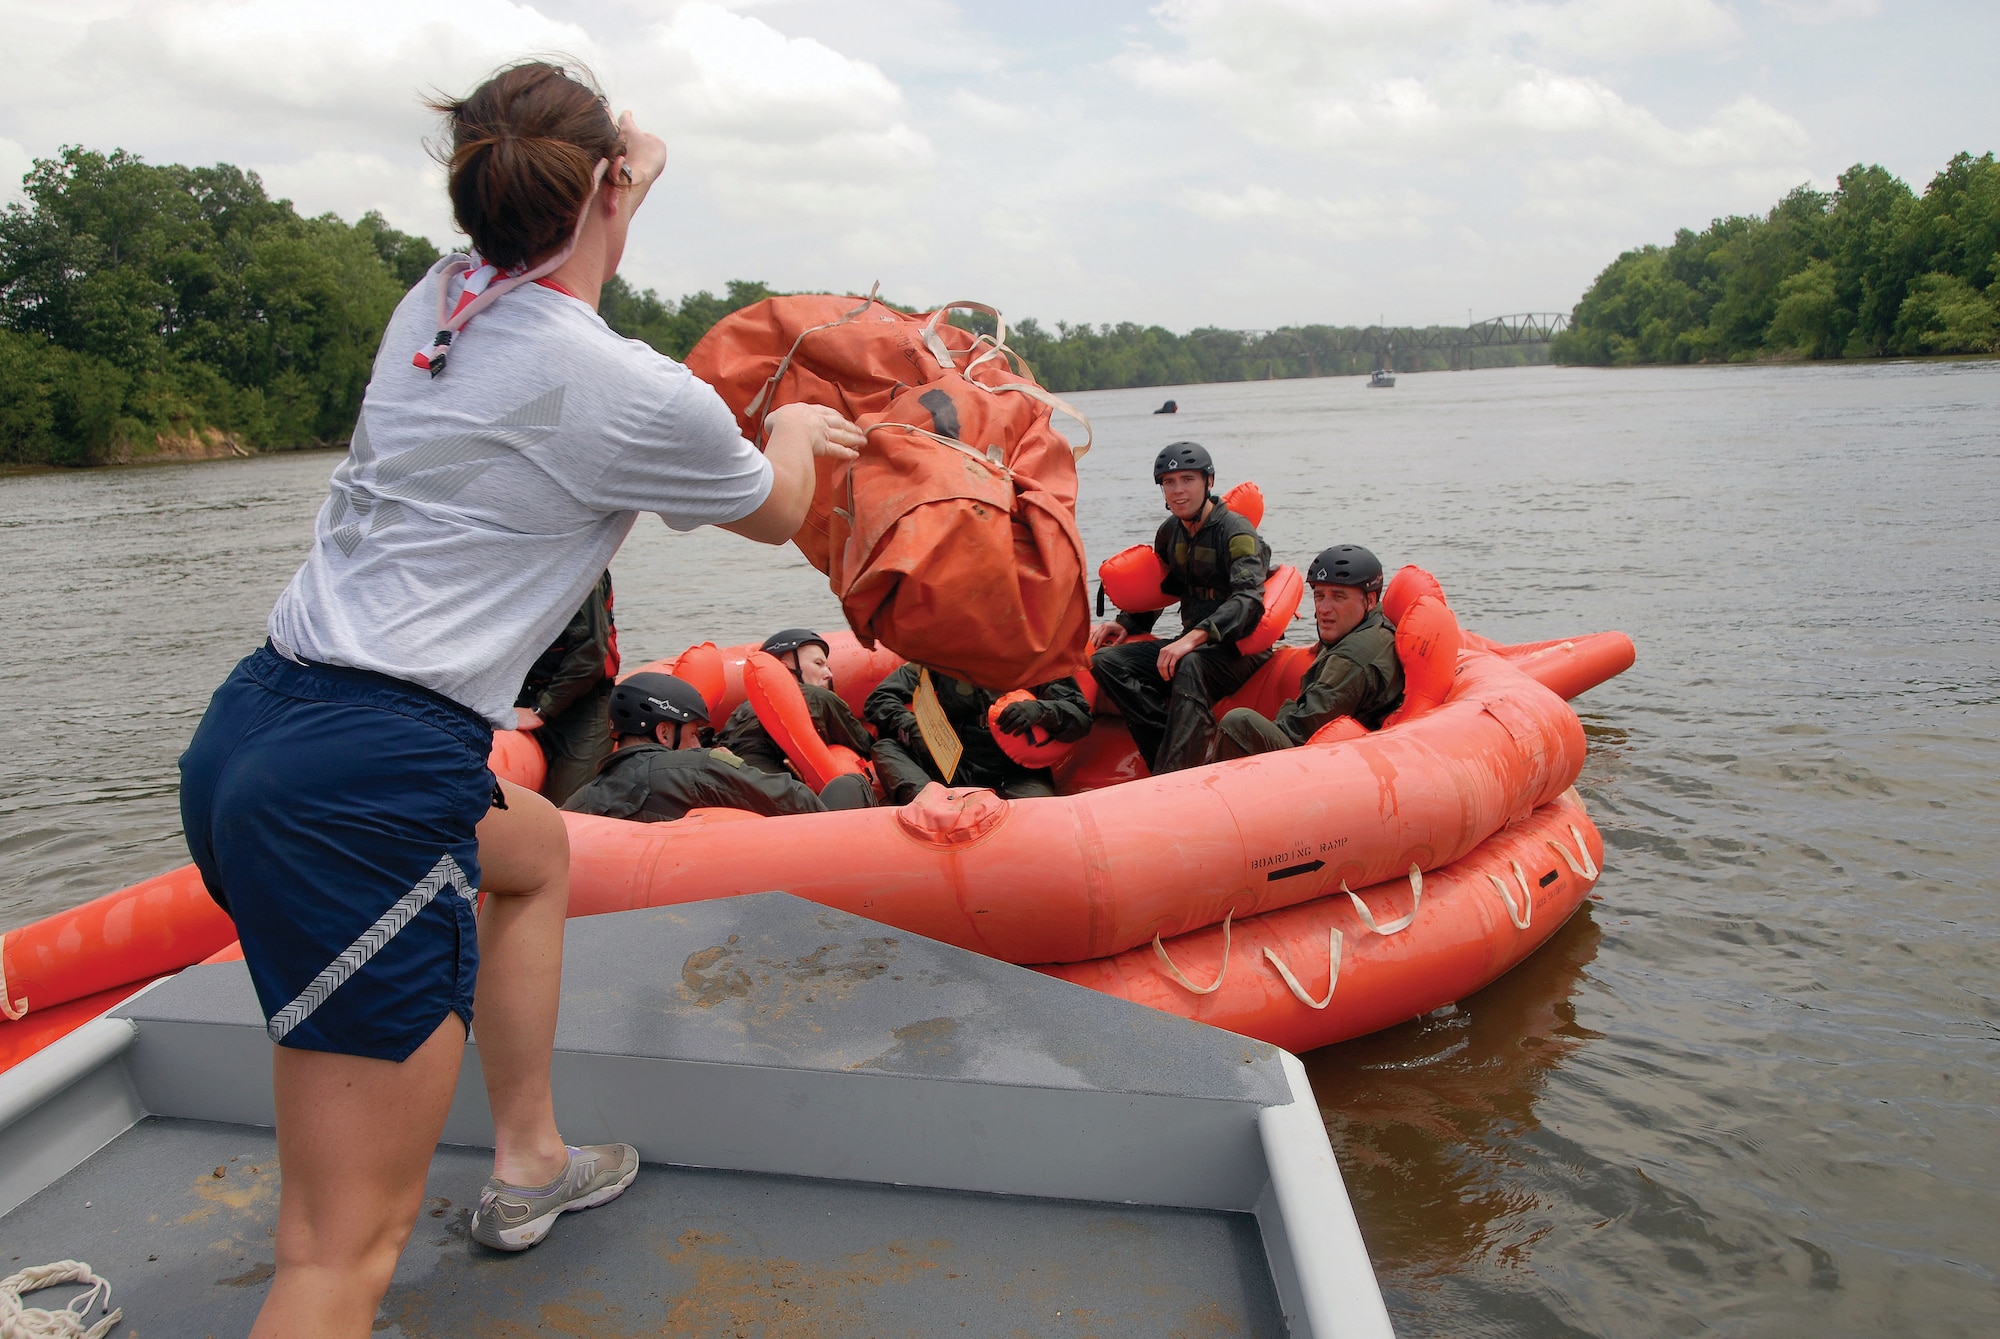 Staff Sgt. Ashley Hill of the 908th Operation Support Flight assists ‘survivors’ during the wing's mandated water-survival training at the Alabama River in Millbrook, Ala.  (Air Force photo by Gene H. Hughes)